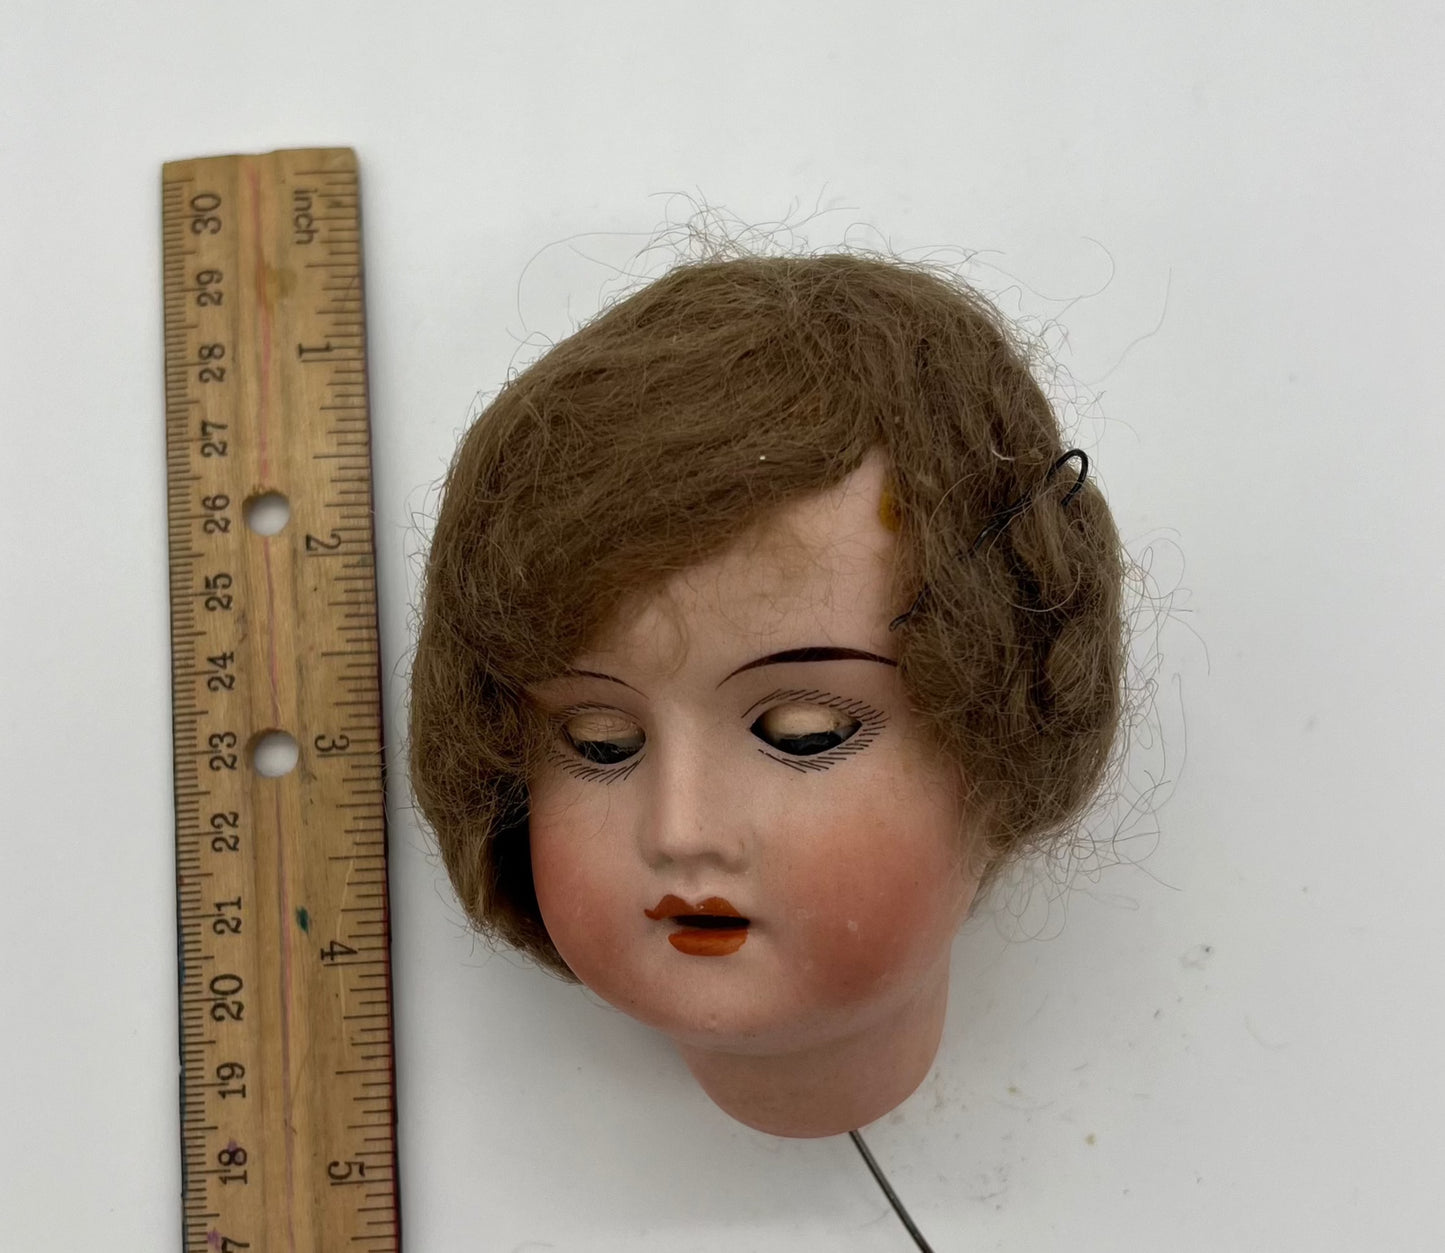 1960s Vintage Doll Head with Support Rod